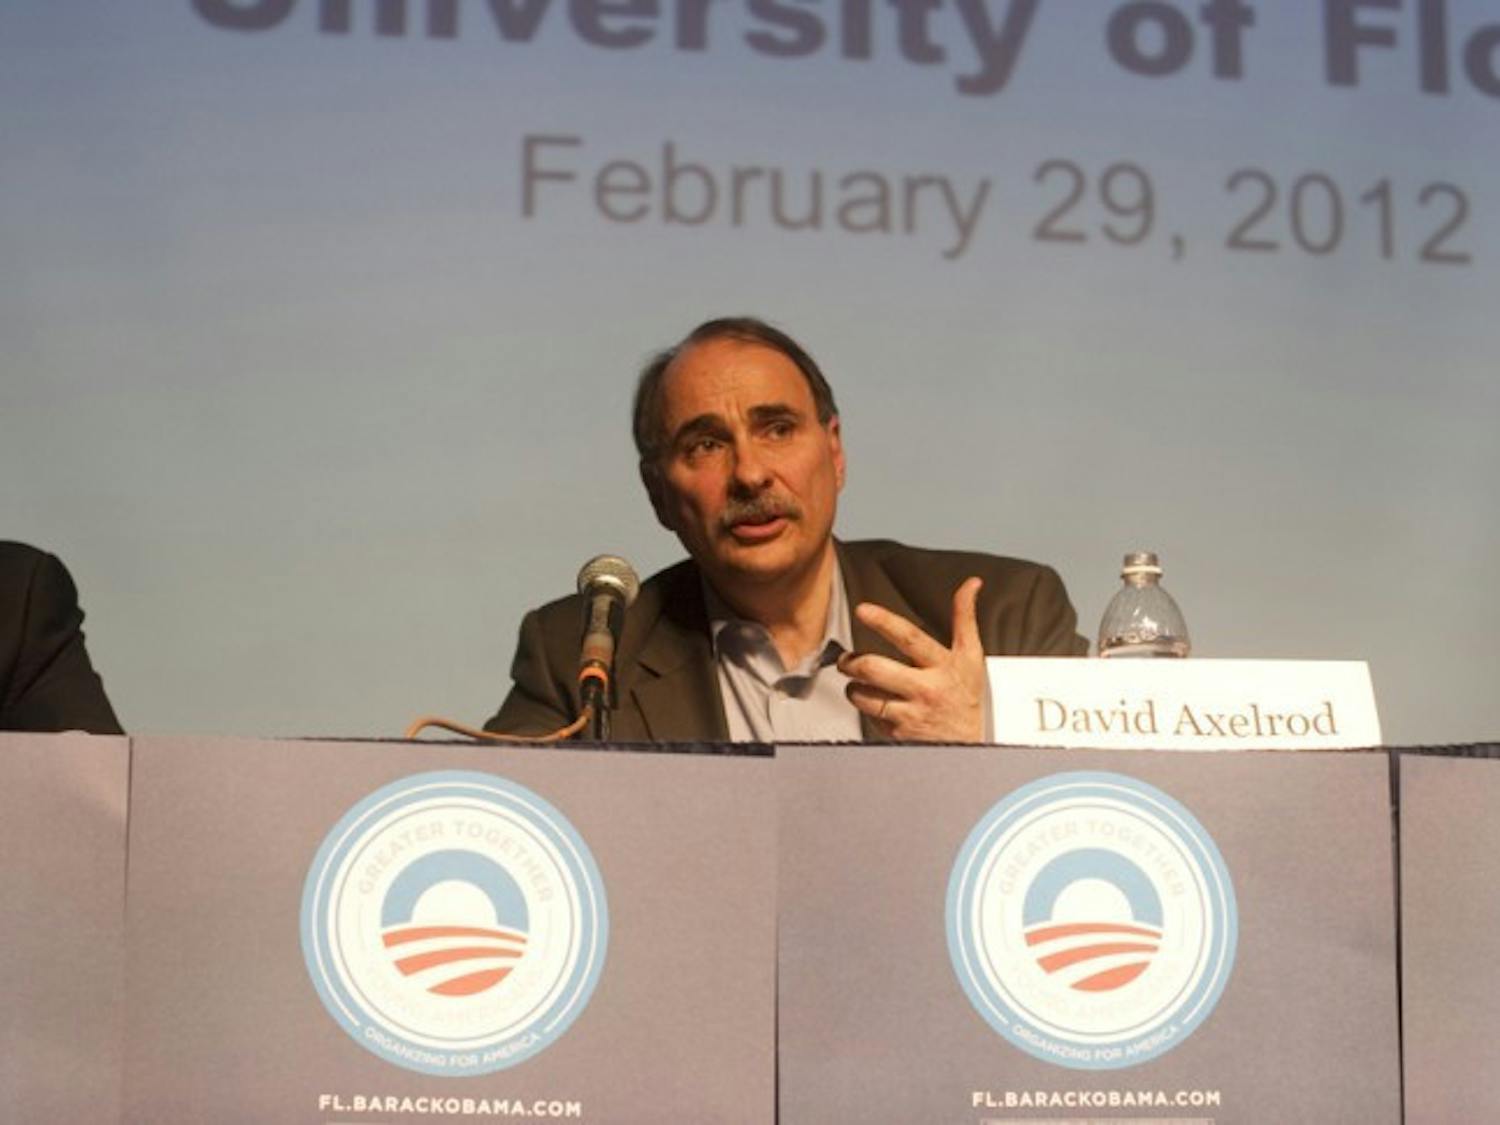 David Axelrod, former adviser to President Obama and the communications director for his 2012 re-election campaign, discusses past actions and future plans for the Obama administration Wednesday evening in the Rion Ballroom.